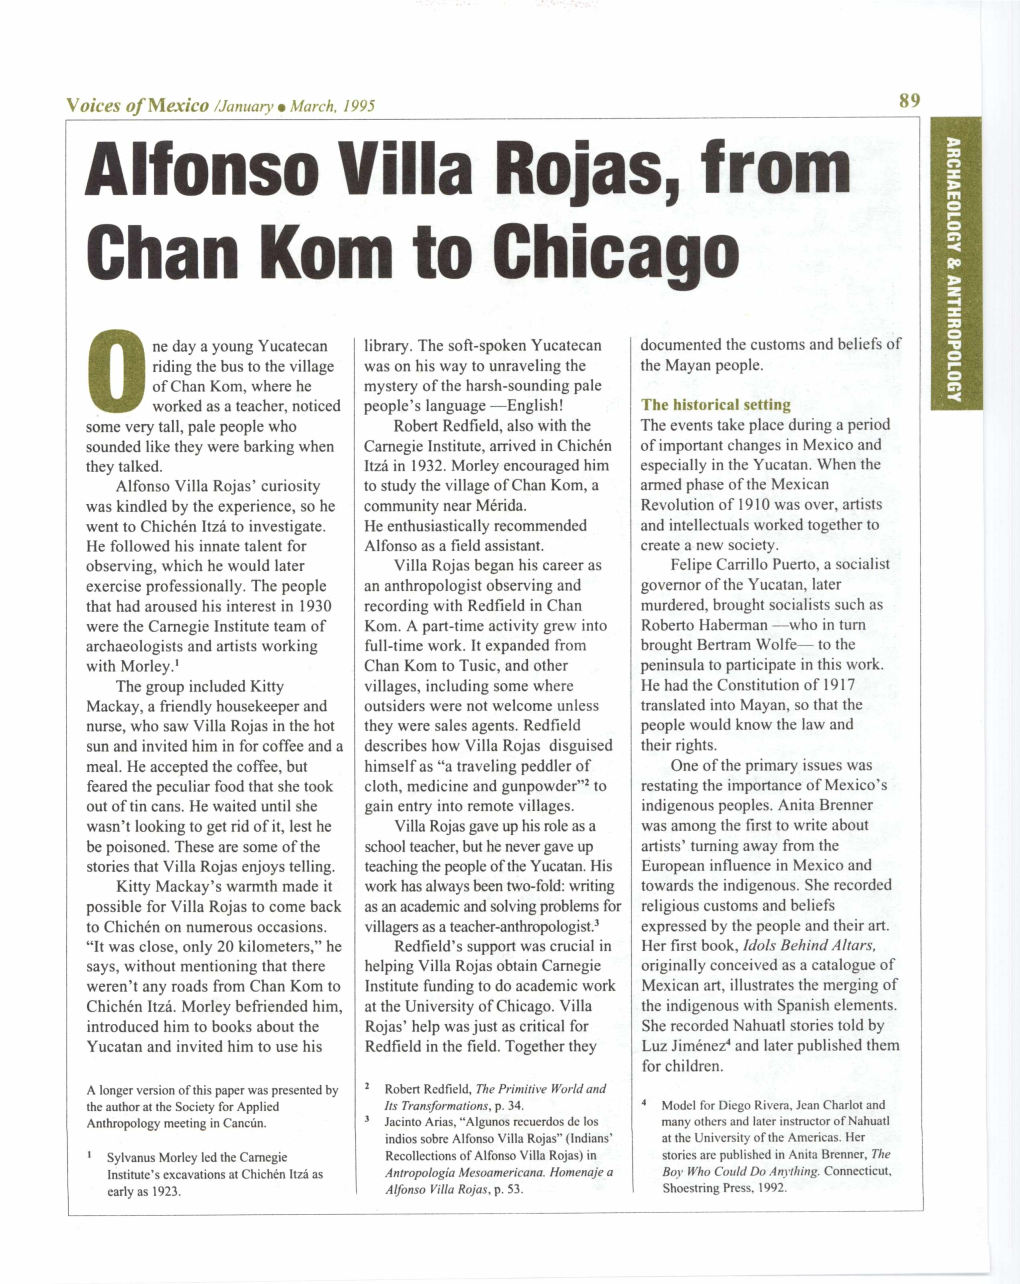 Alfonso Villa Rojas, from Chan Kom to Chicago